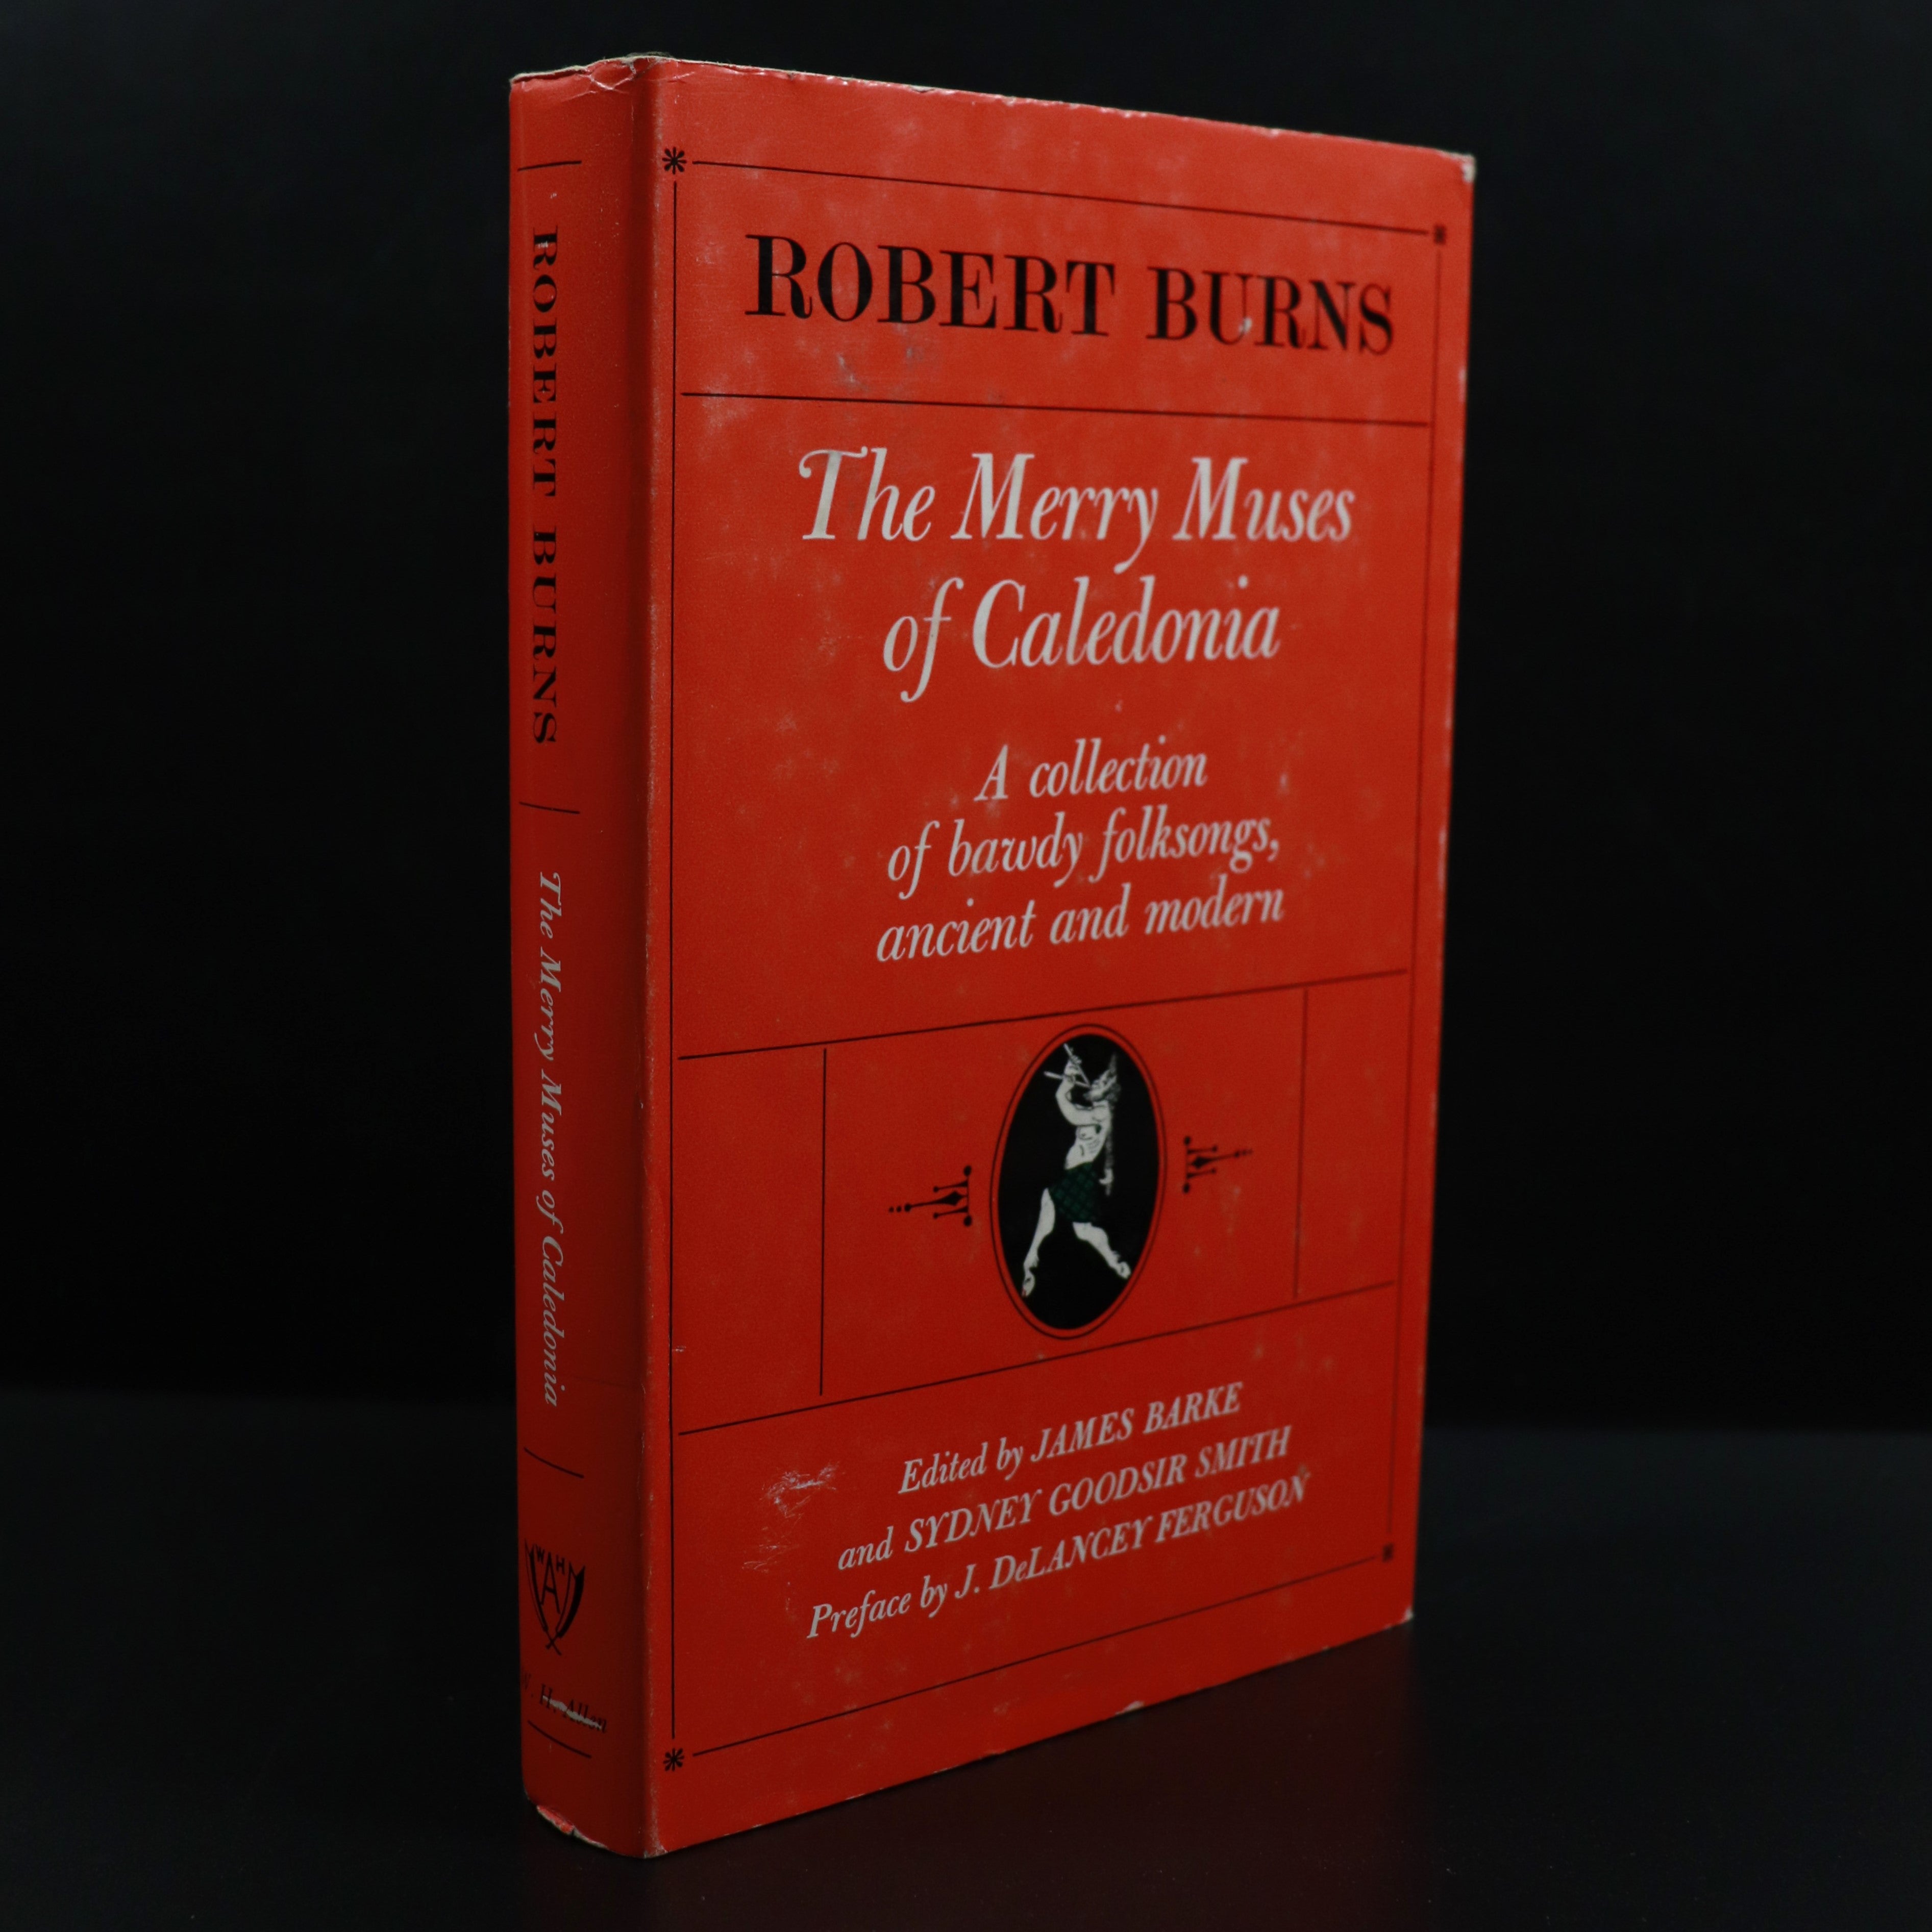 1965 The Merry Muses Of Caledonia by Robert Burns Scottish Literature Book